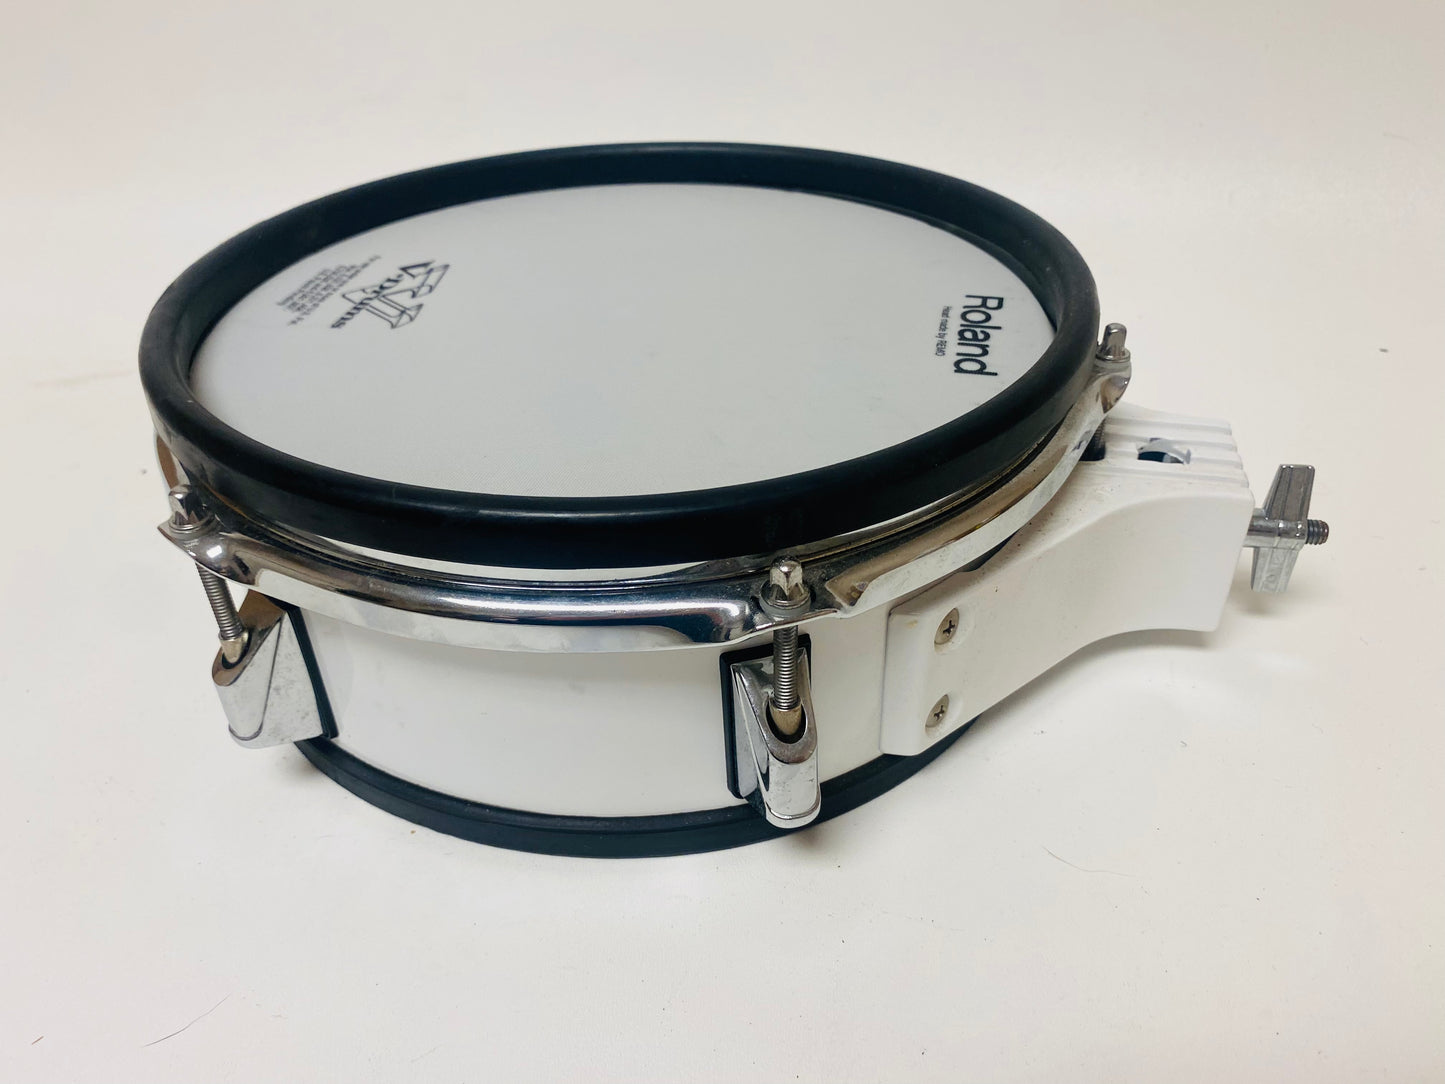 Roland PD-105 WH 10” Mesh Snare Tom Pad PD105